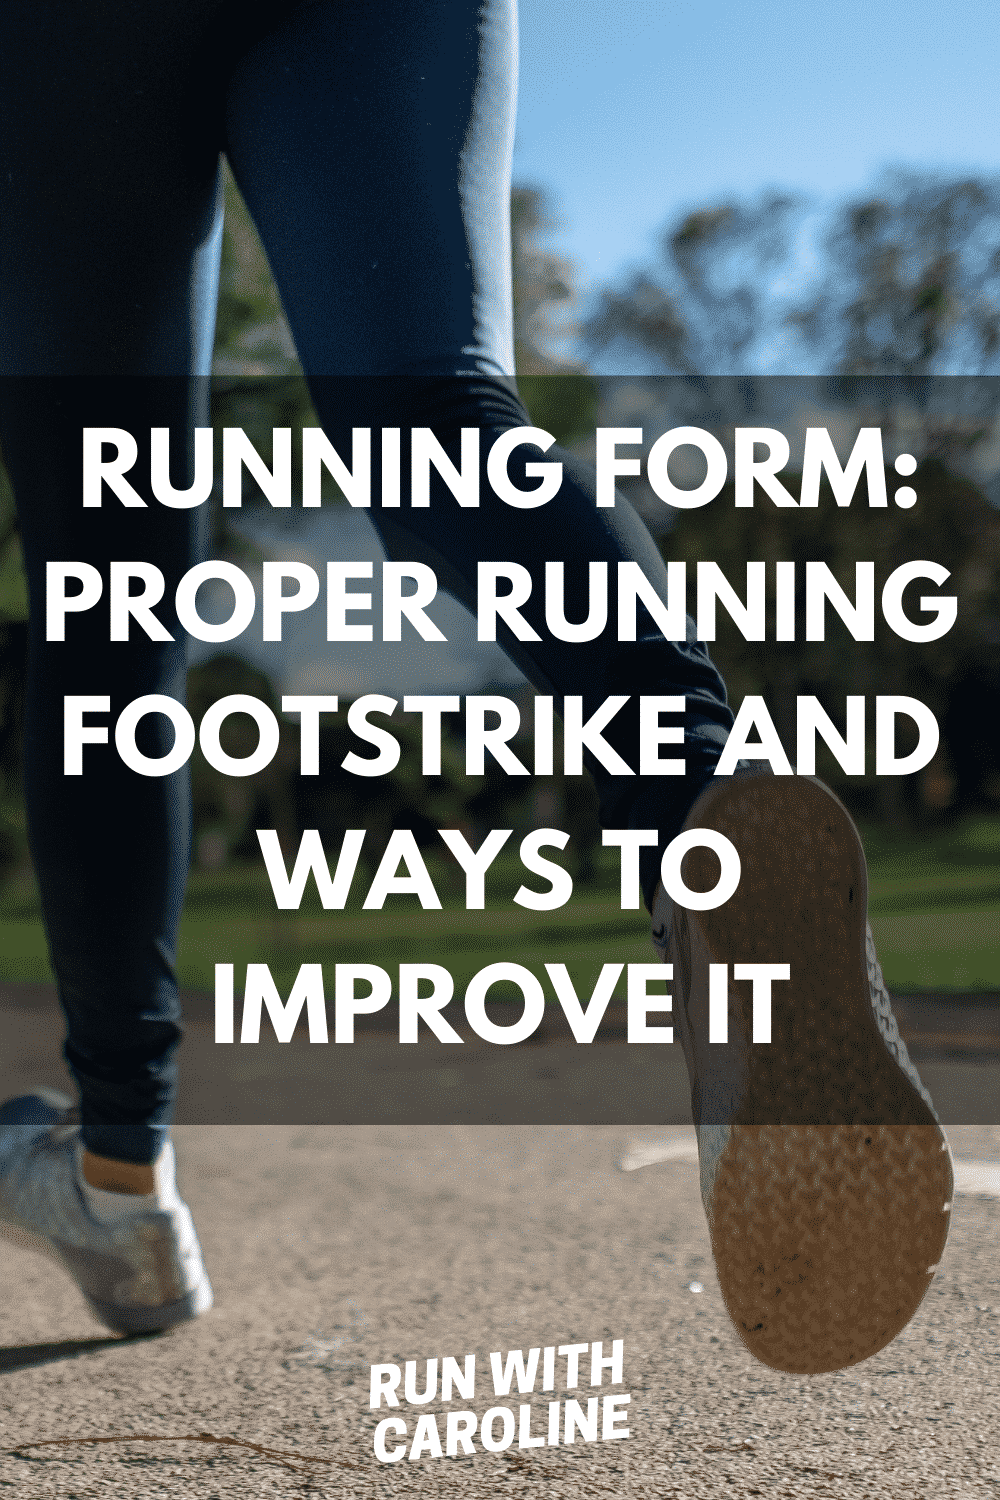 Proper running footstrike and ways to improve it - Run With Caroline